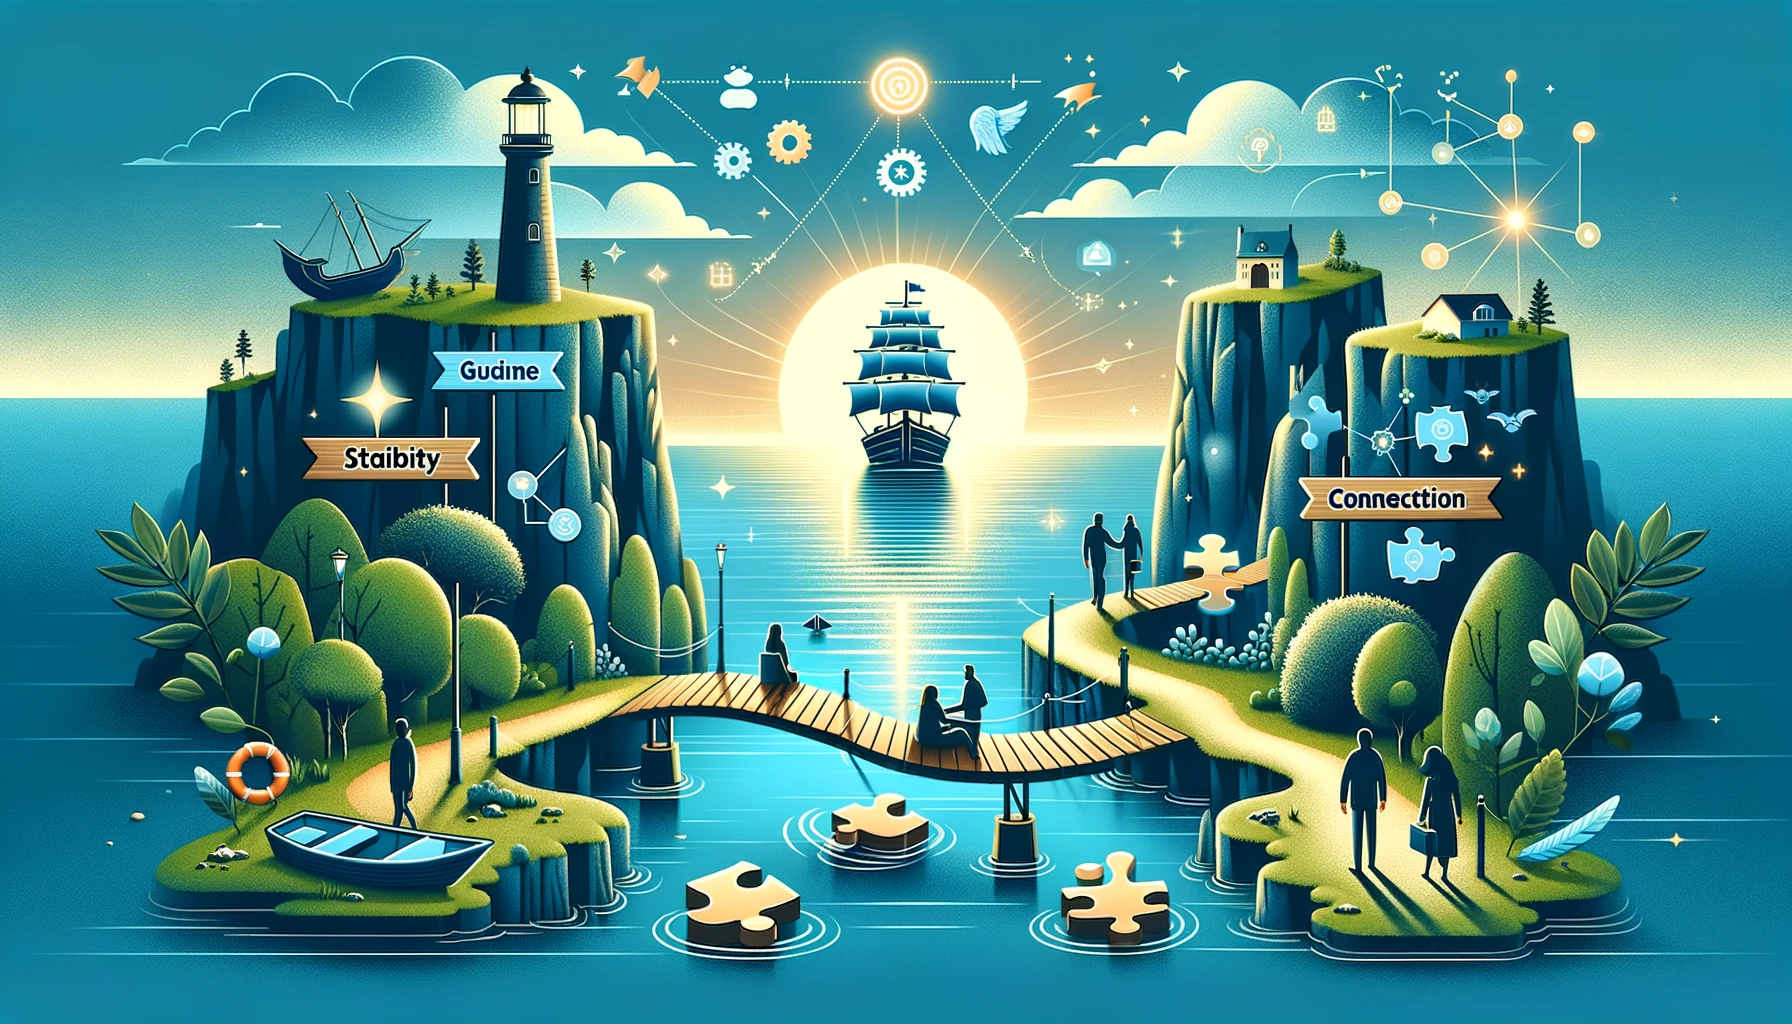 A serene scene representing Churn Reduction Strategies with a stable ship, guiding lighthouse, and connecting bridge, symbolizing stability, guidance, and connection, with elements of customer engagement like handshakes and smiley faces.